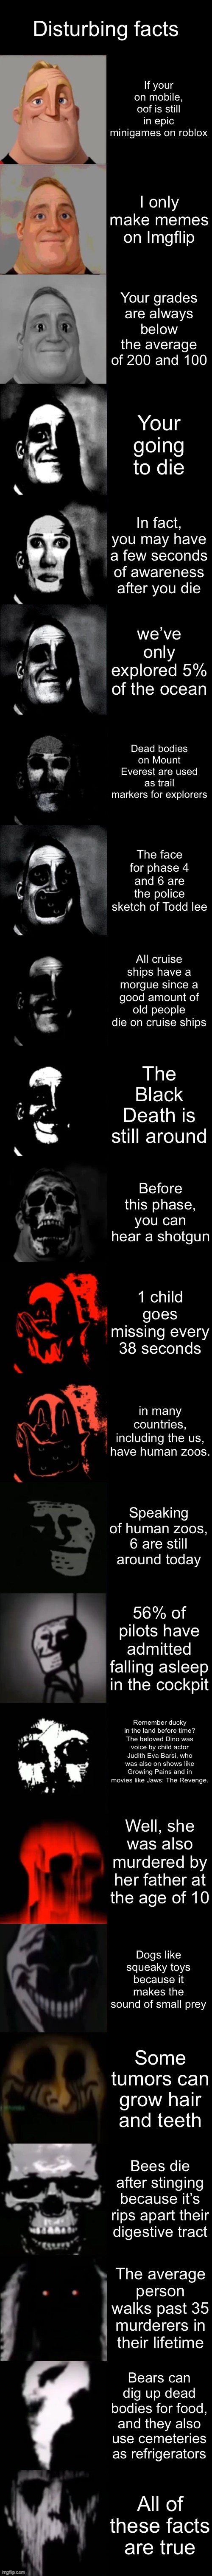 Disturbing facts | Disturbing facts; If your on mobile, oof is still in epic minigames on roblox; I only make memes on Imgflip; Your grades are always below the average of 200 and 100; Your going to die; In fact, you may have a few seconds of awareness after you die; we’ve only explored 5% of the ocean; Dead bodies on Mount Everest are used as trail markers for explorers; The face for phase 4 and 6 are the police sketch of Todd lee; All cruise ships have a morgue since a good amount of old people die on cruise ships; The Black Death is still around; Before this phase, you can hear a shotgun; 1 child goes missing every 38 seconds; in many countries, including the us, have human zoos. Speaking of human zoos, 6 are still around today; 56% of pilots have admitted falling asleep in the cockpit; Remember ducky in the land before time? The beloved Dino was voice by child actor Judith Eva Barsi, who was also on shows like Growing Pains and in movies like Jaws: The Revenge. Well, she was also murdered by her father at the age of 10; Dogs like squeaky toys because it makes the sound of small prey; Some tumors can grow hair and teeth; Bees die after stinging because it’s rips apart their digestive tract; The average person walks past 35 murderers in their lifetime; Bears can dig up dead bodies for food, and they also use cemeteries as refrigerators; All of these facts are true | image tagged in mr incredible becoming uncanny extended hd | made w/ Imgflip meme maker